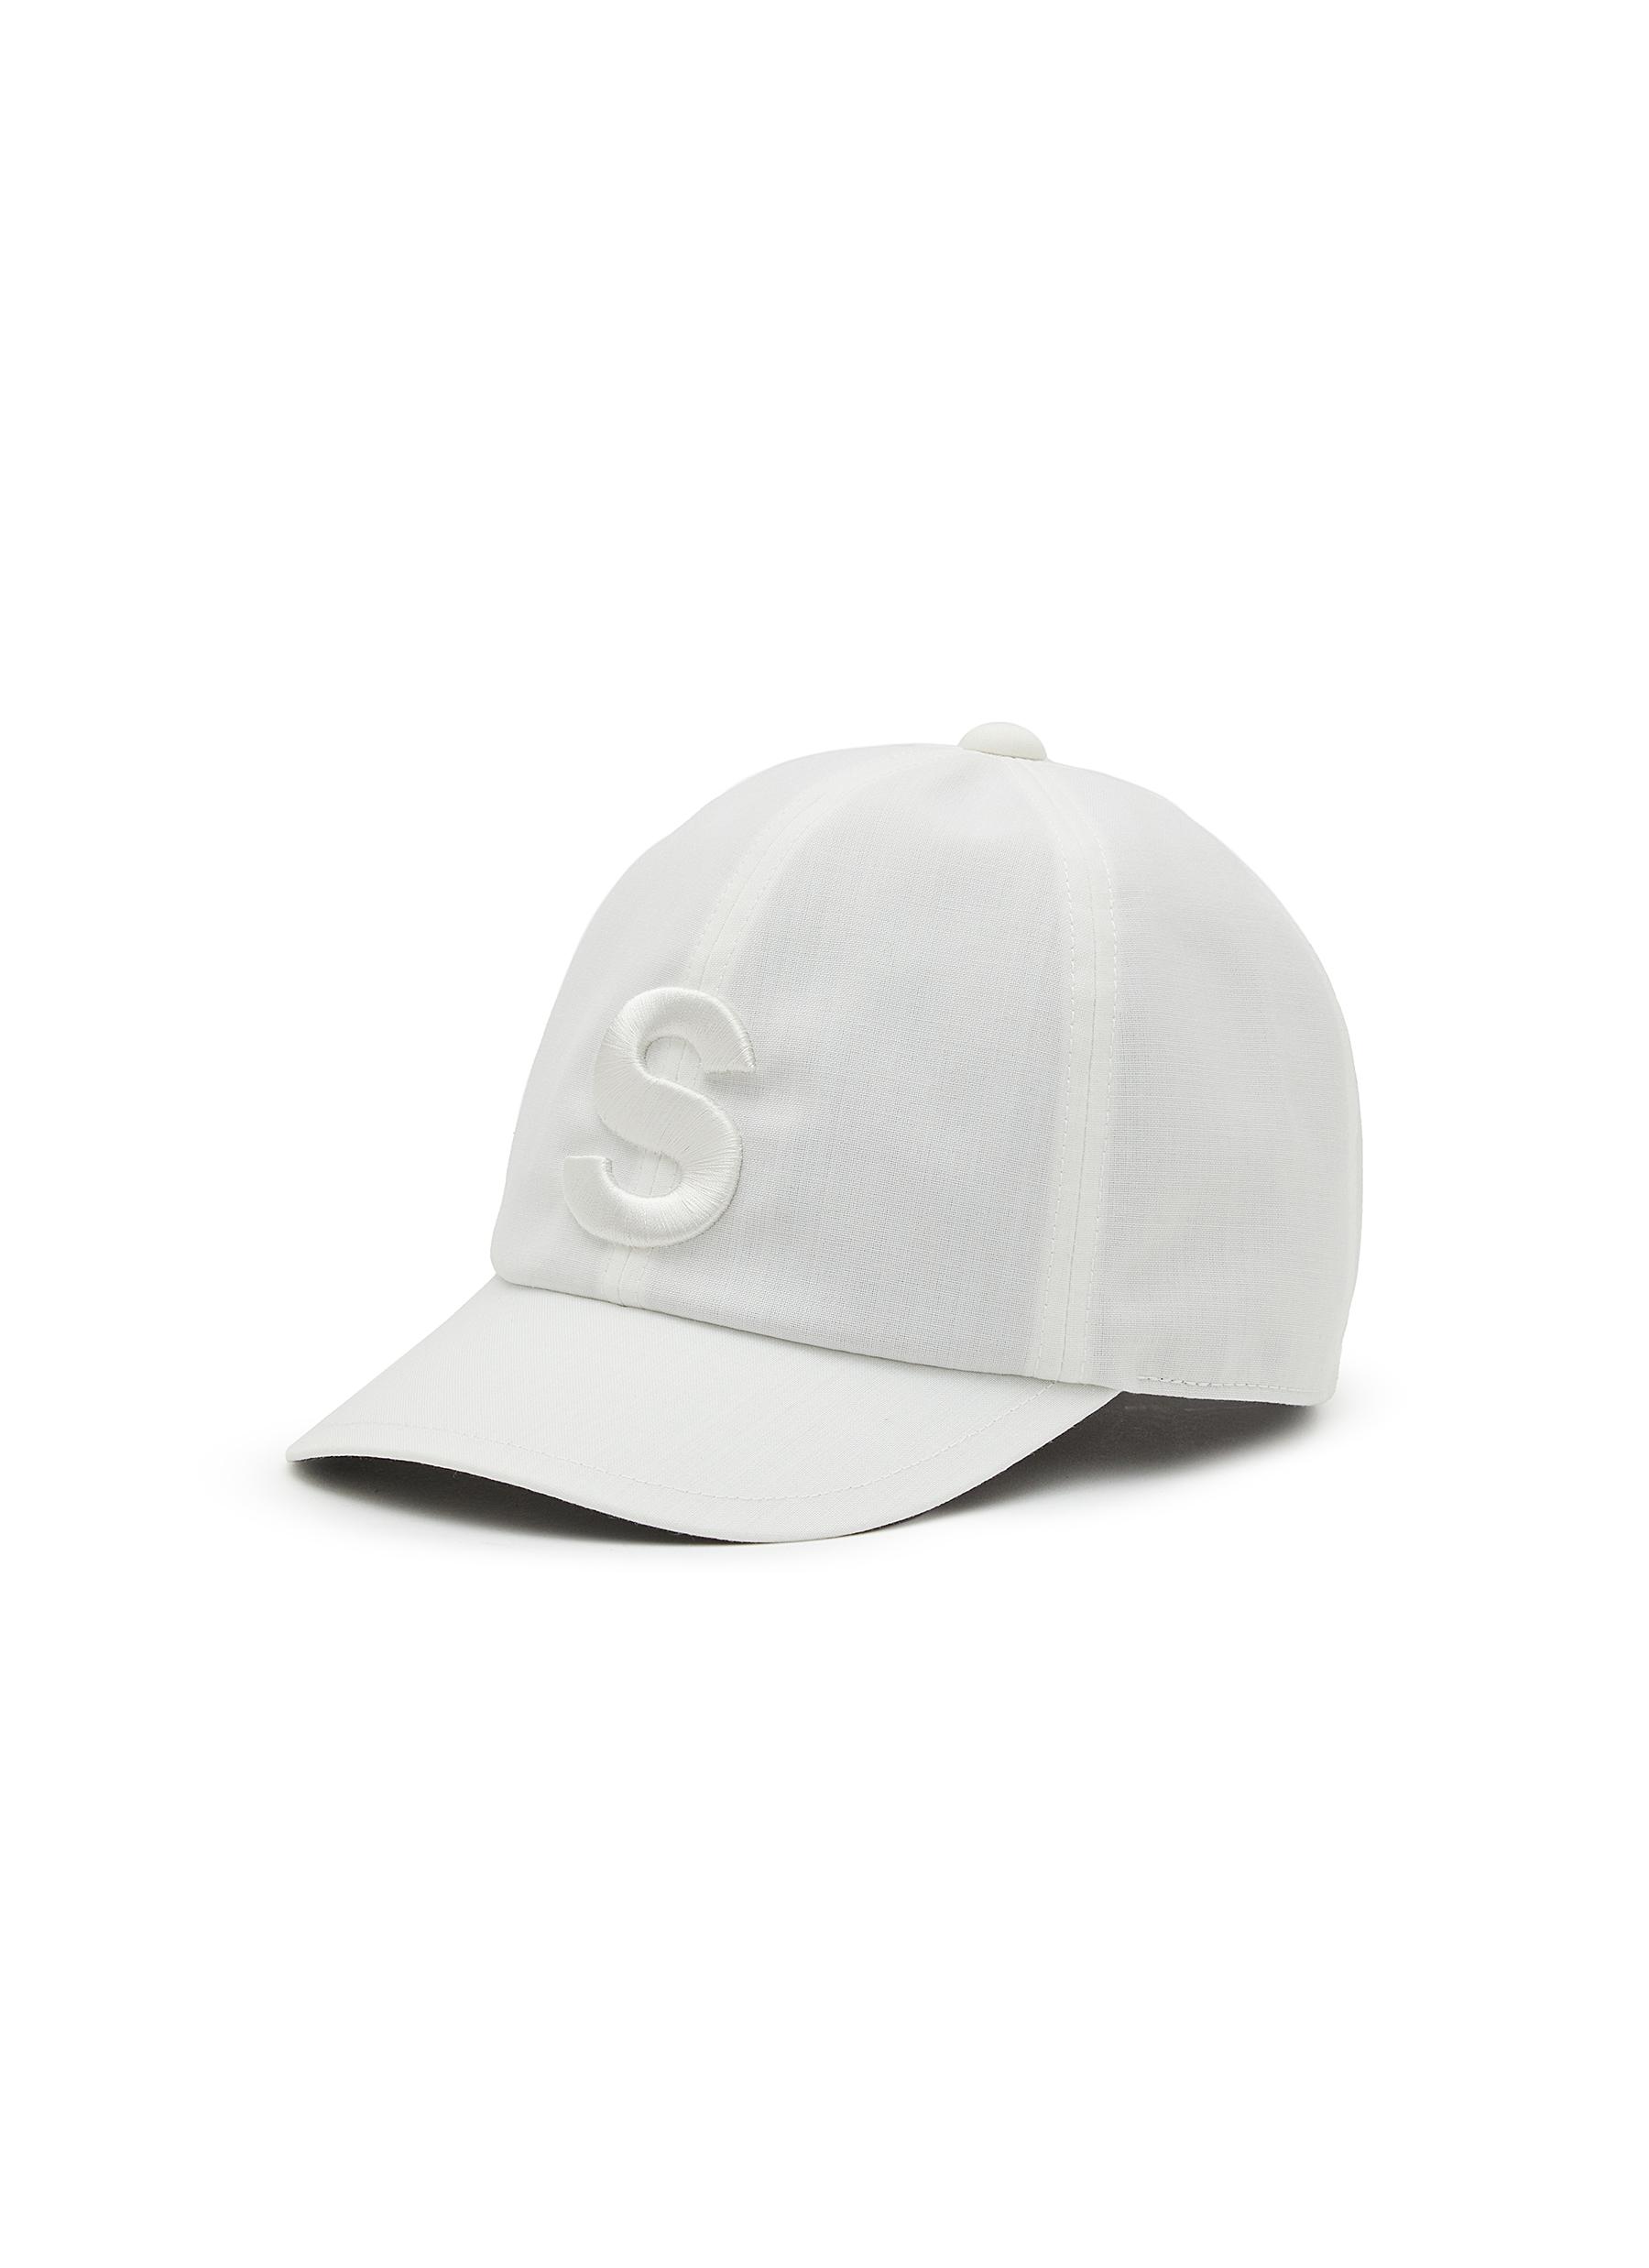 Embroidered S Baseball Cap